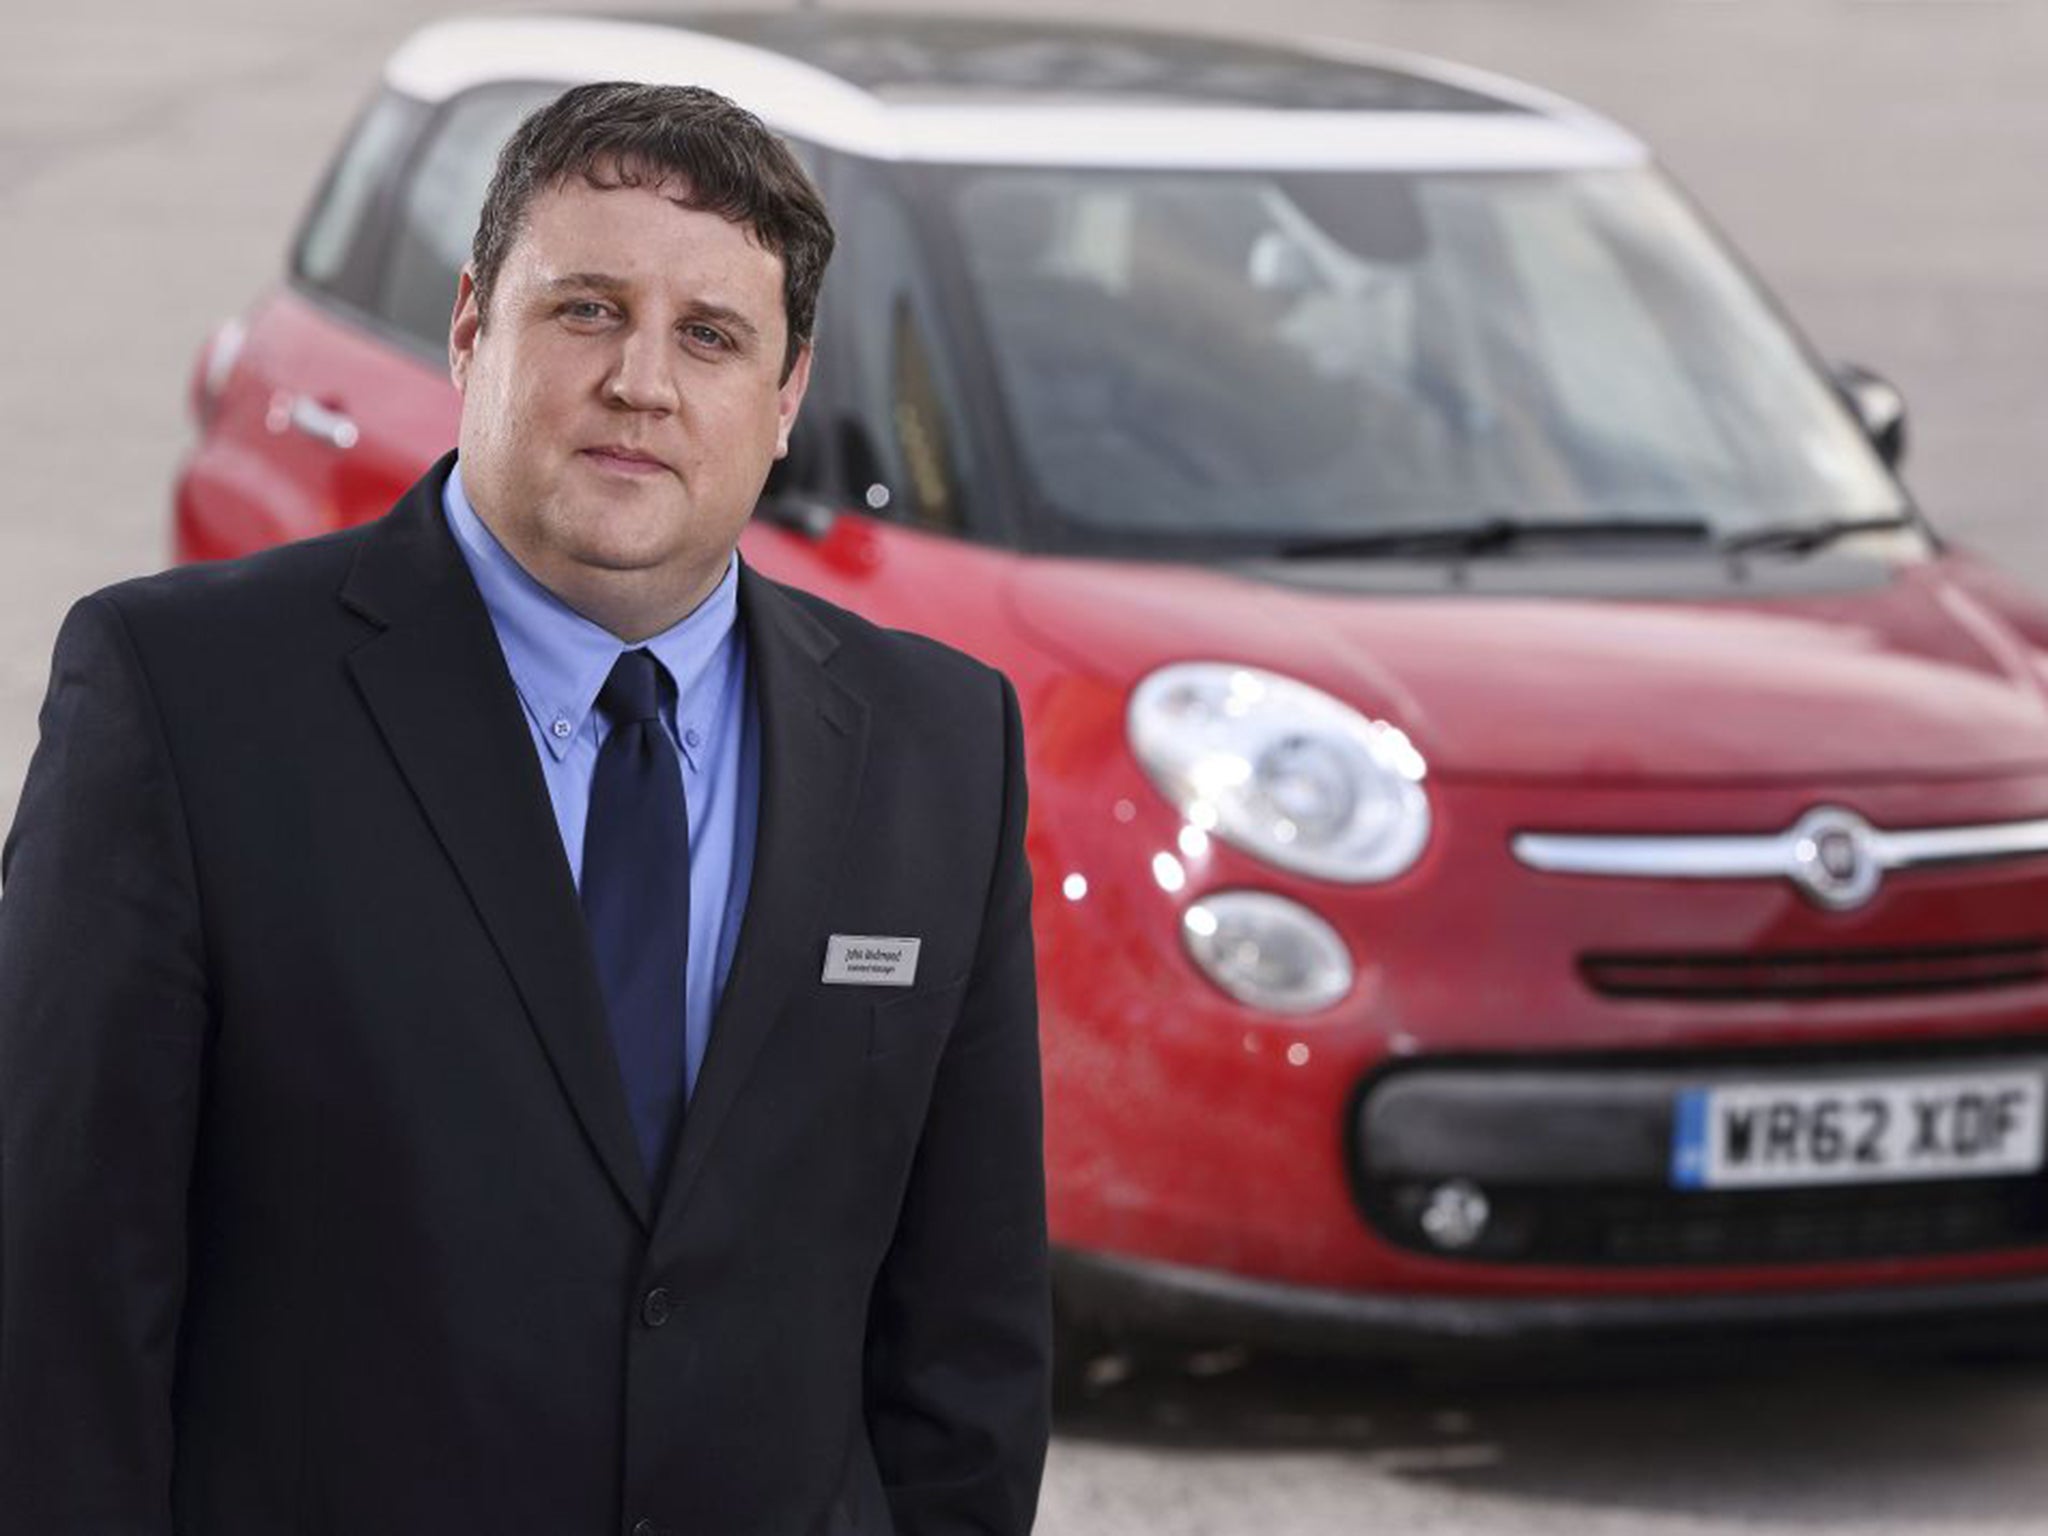 Driving force: Peter Kay stars in and co-wrote ‘Car Share’